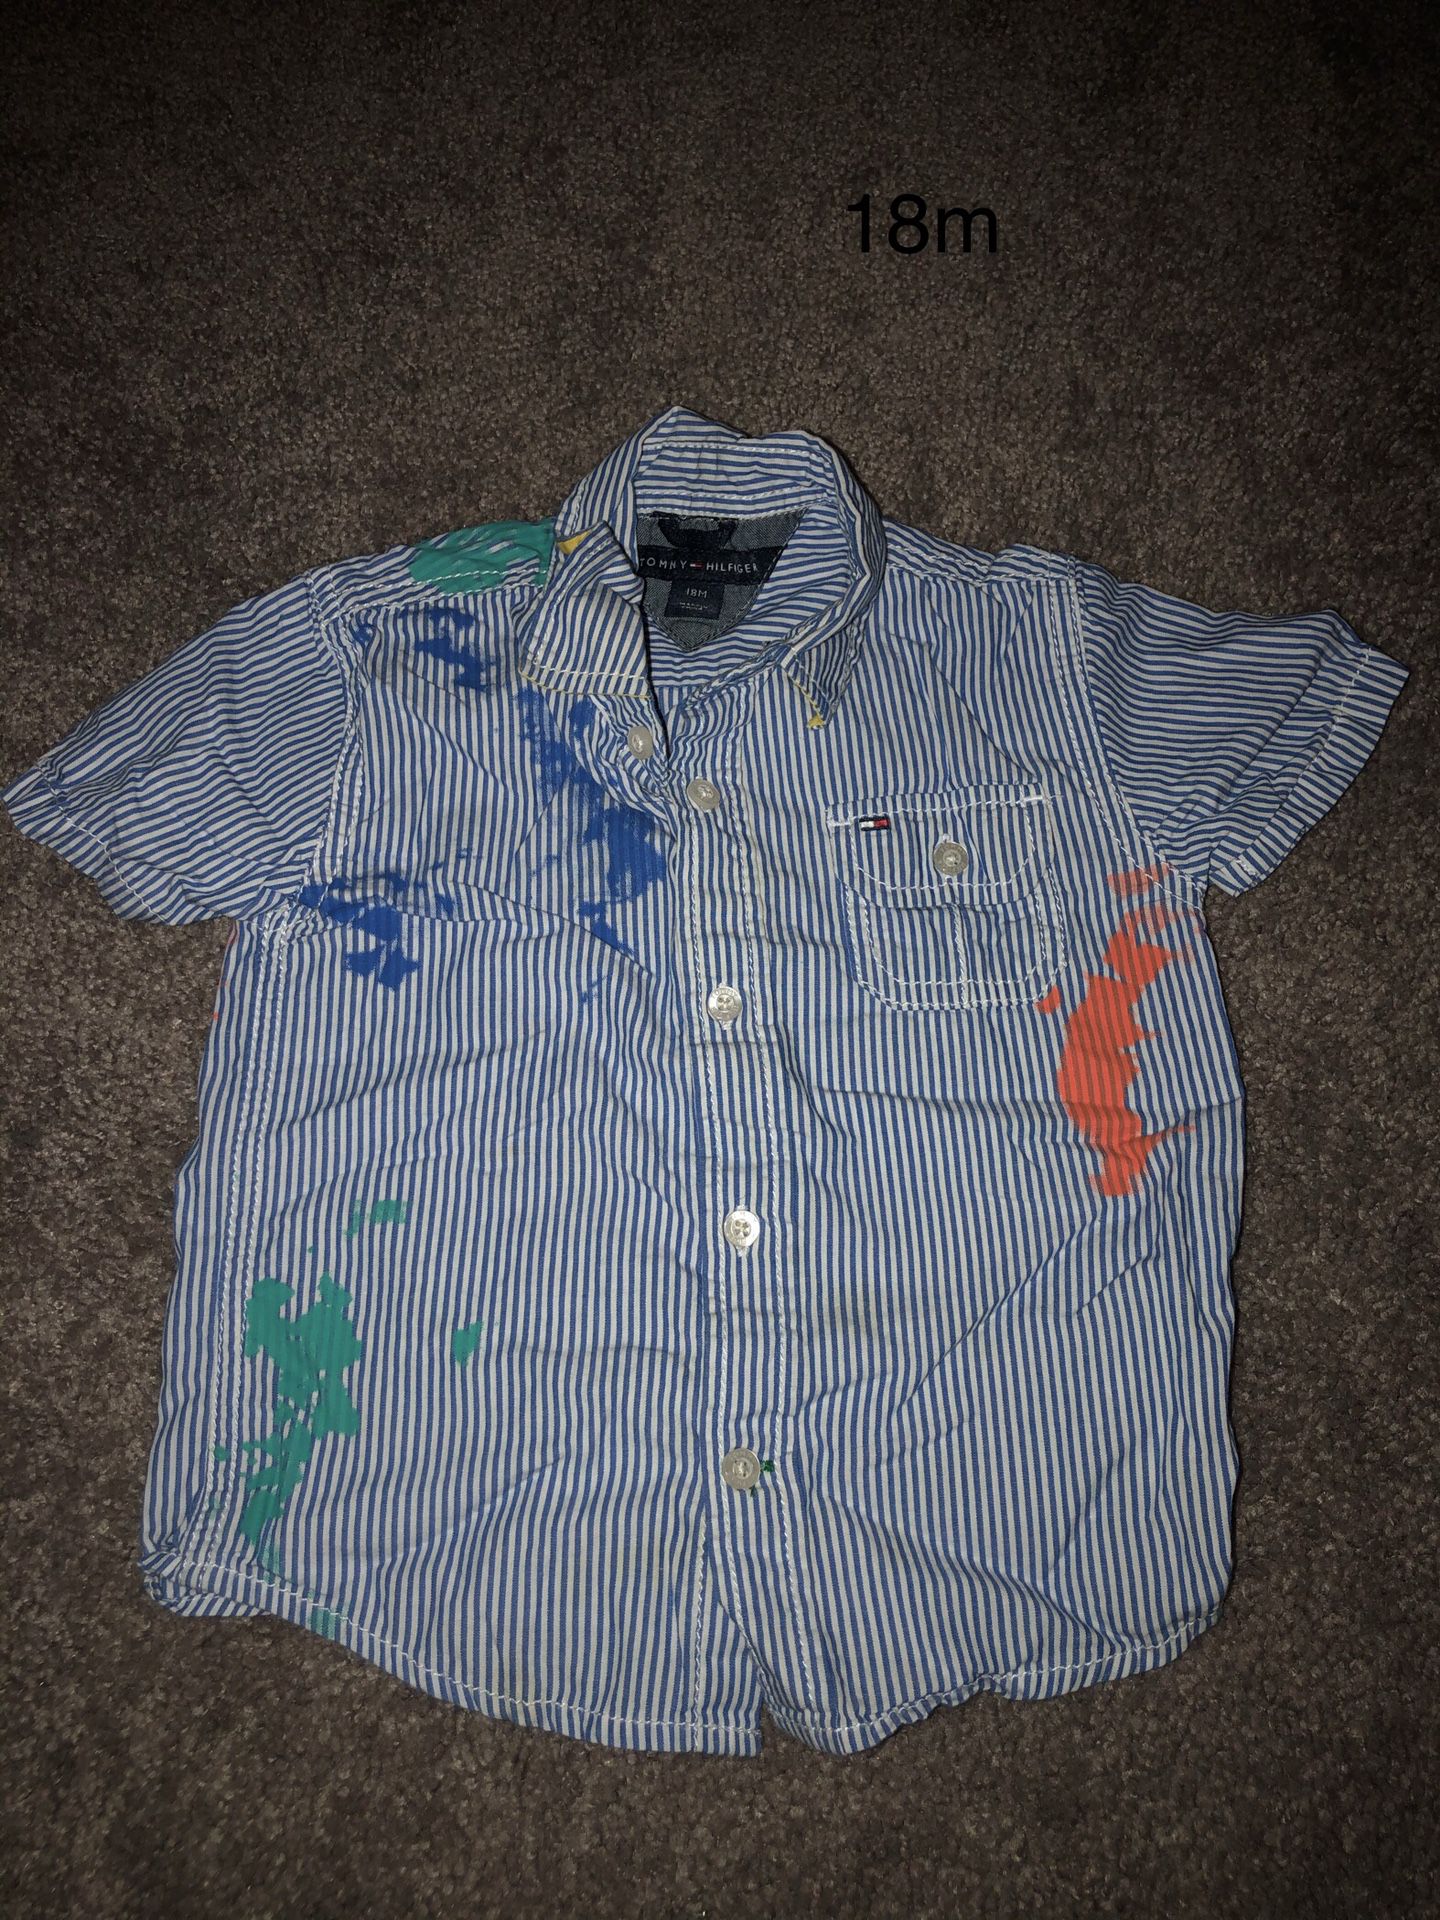 Tommy Hilfiger shirt (paint stained design )